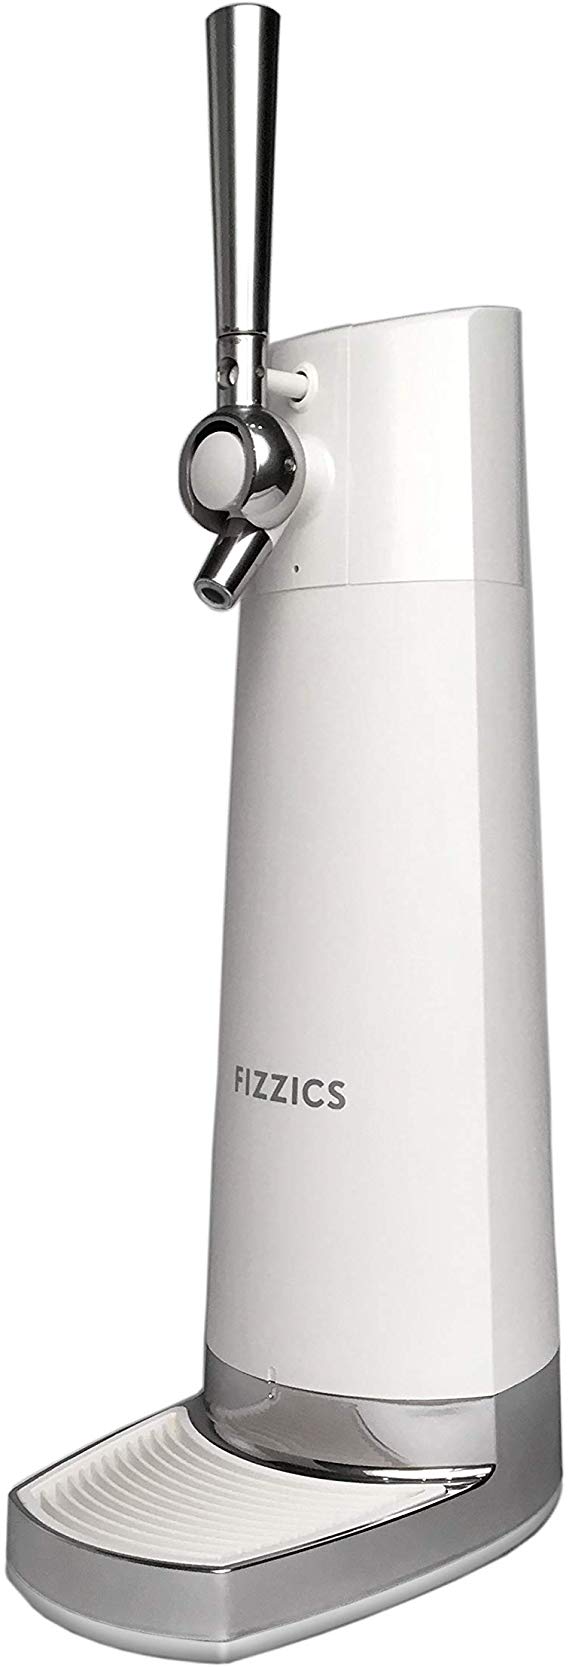 Fizzics DraftPour Beer Dispenser – Ice – Enjoy Fresh Nitro-Style Draft Beer From Any Can or Bottle